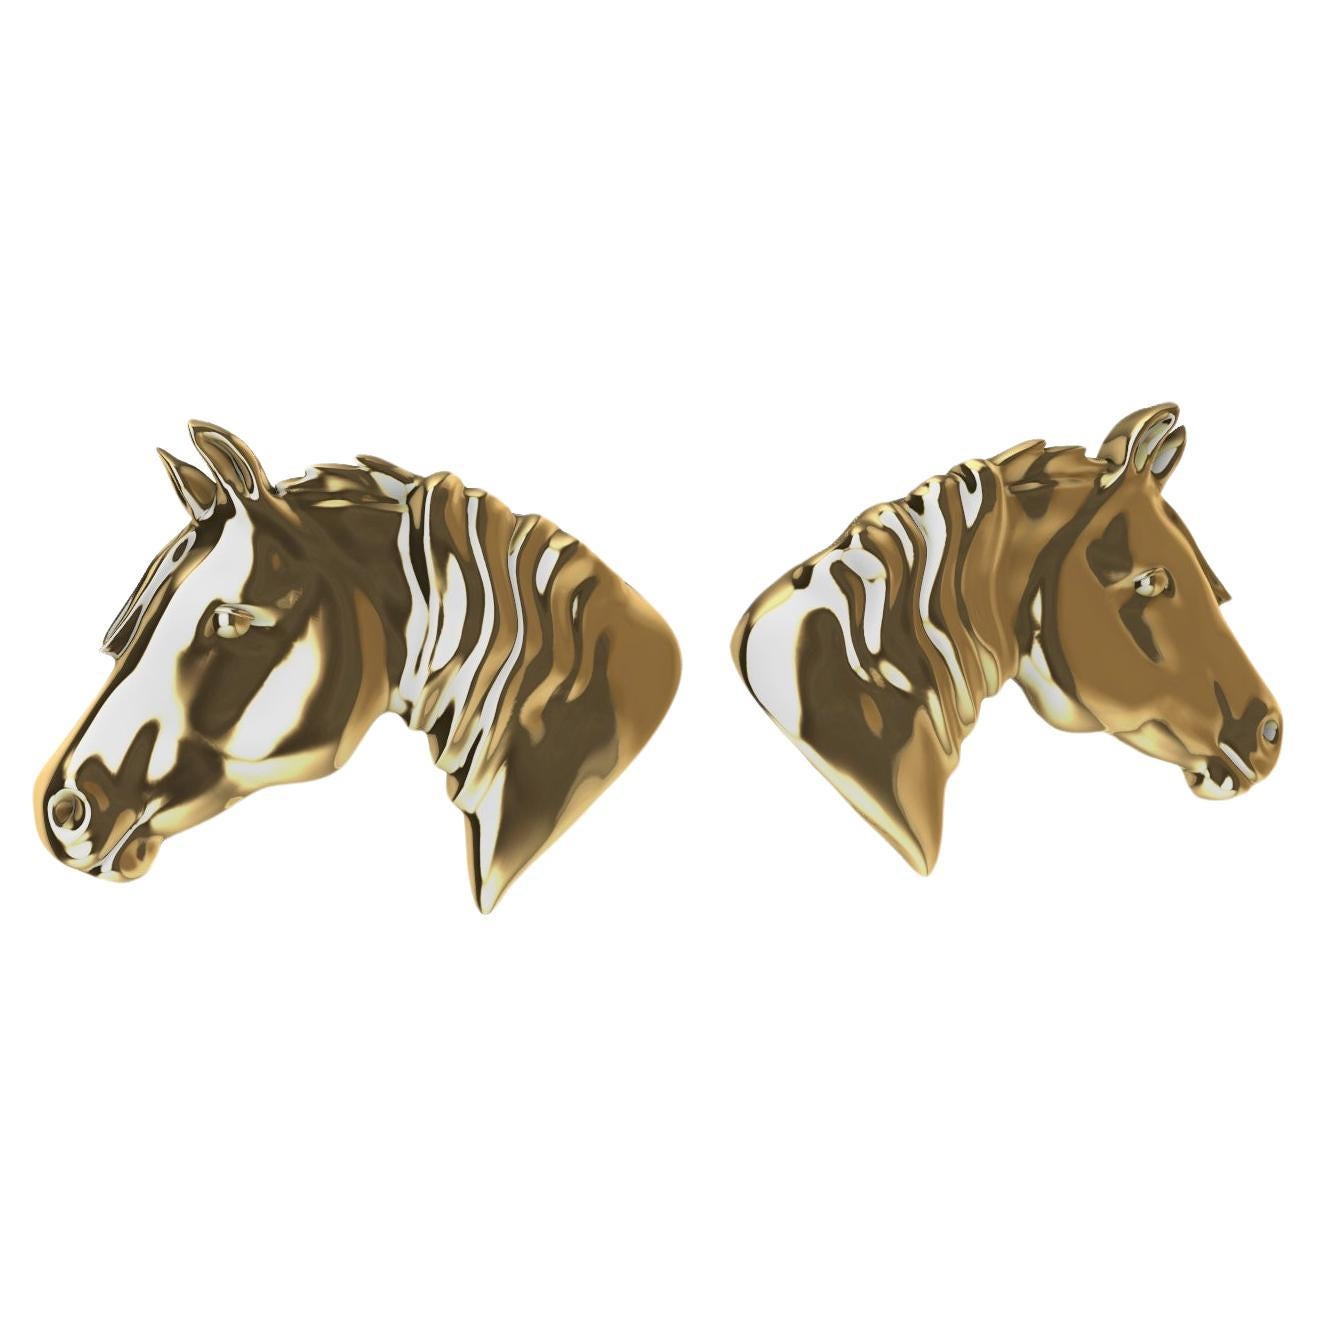 18 Karat Yellow Gold Horse Stud Earrings  Tiffany designer , Thomas Kurilla created this for all the horse lovers. Take your horse wherever you go. Sculpture is my passion.   18 mm wide  High polished 18 karat yellow gold..  Made to order in NYC , 